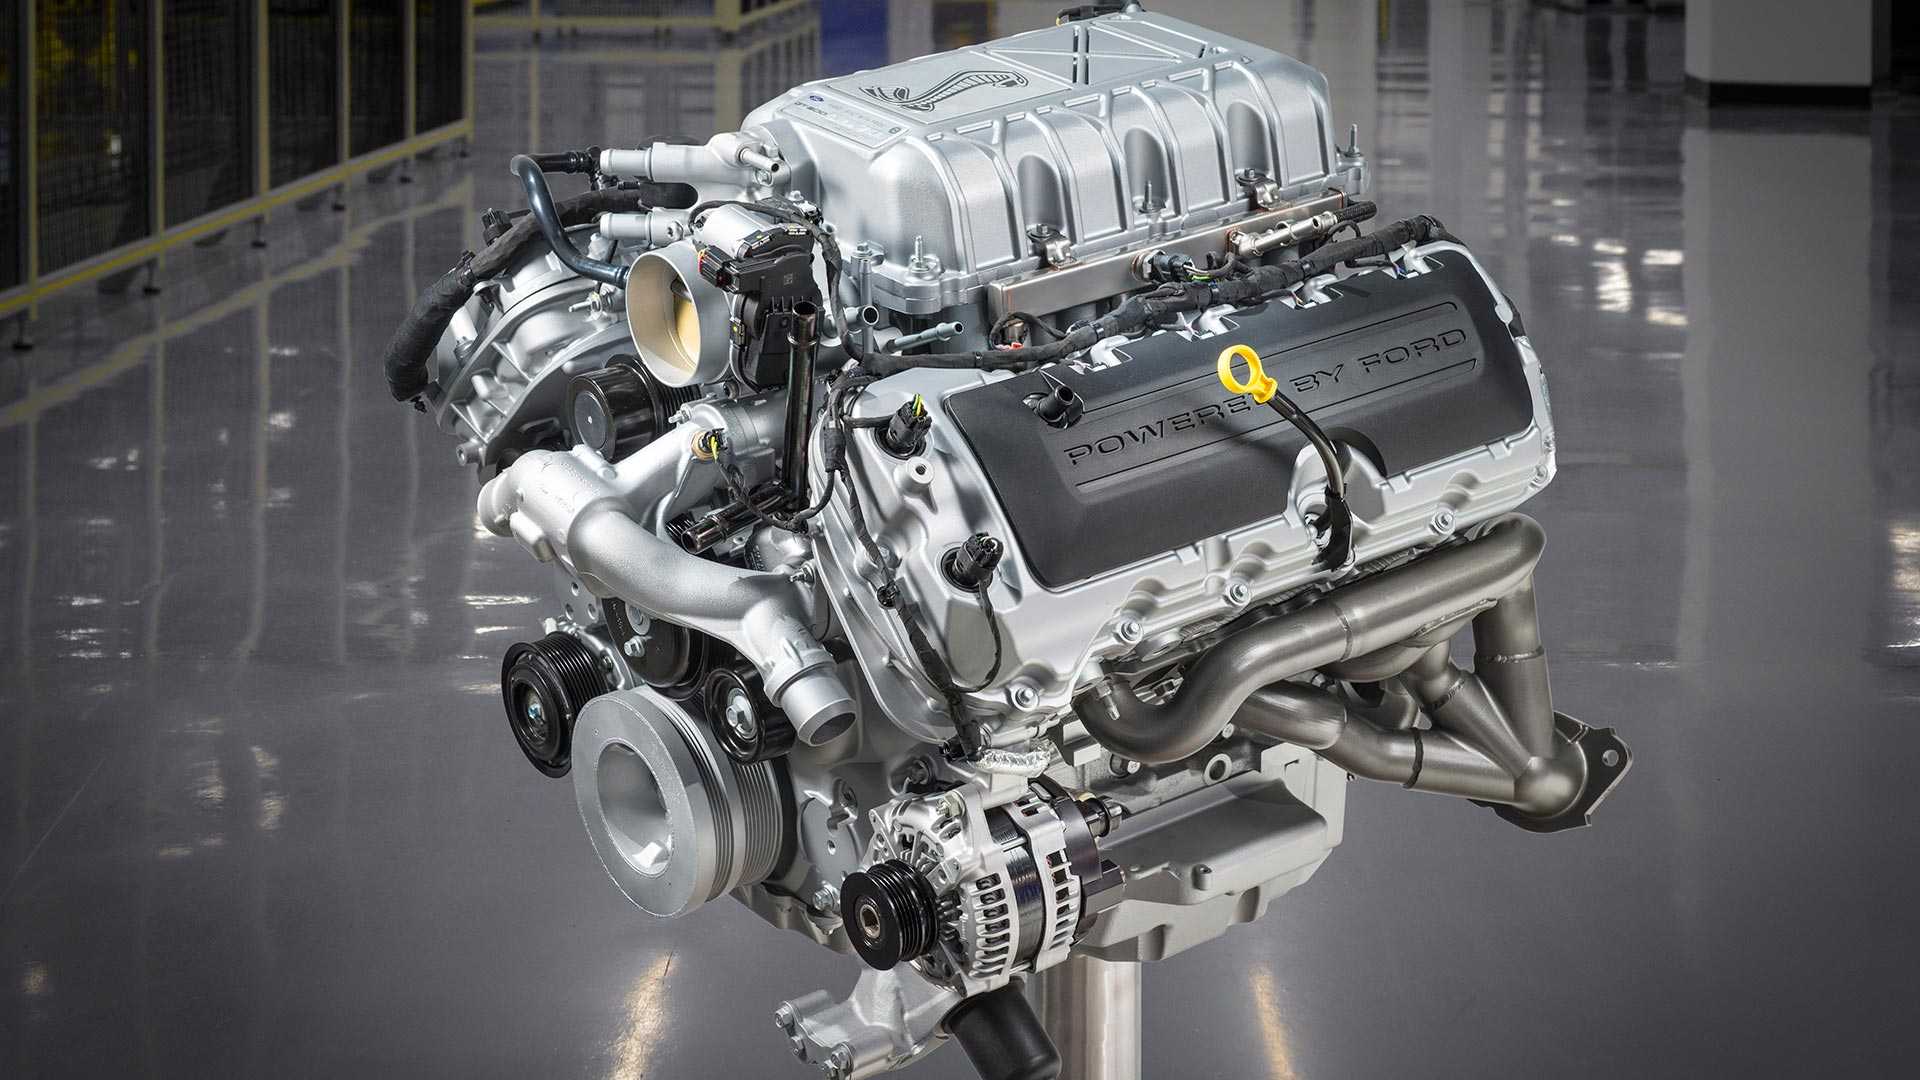 2020 ford mustang shelby gt500 engine - موستانگ شلبی GT500 مدل 2020 با 760 اسب بخار